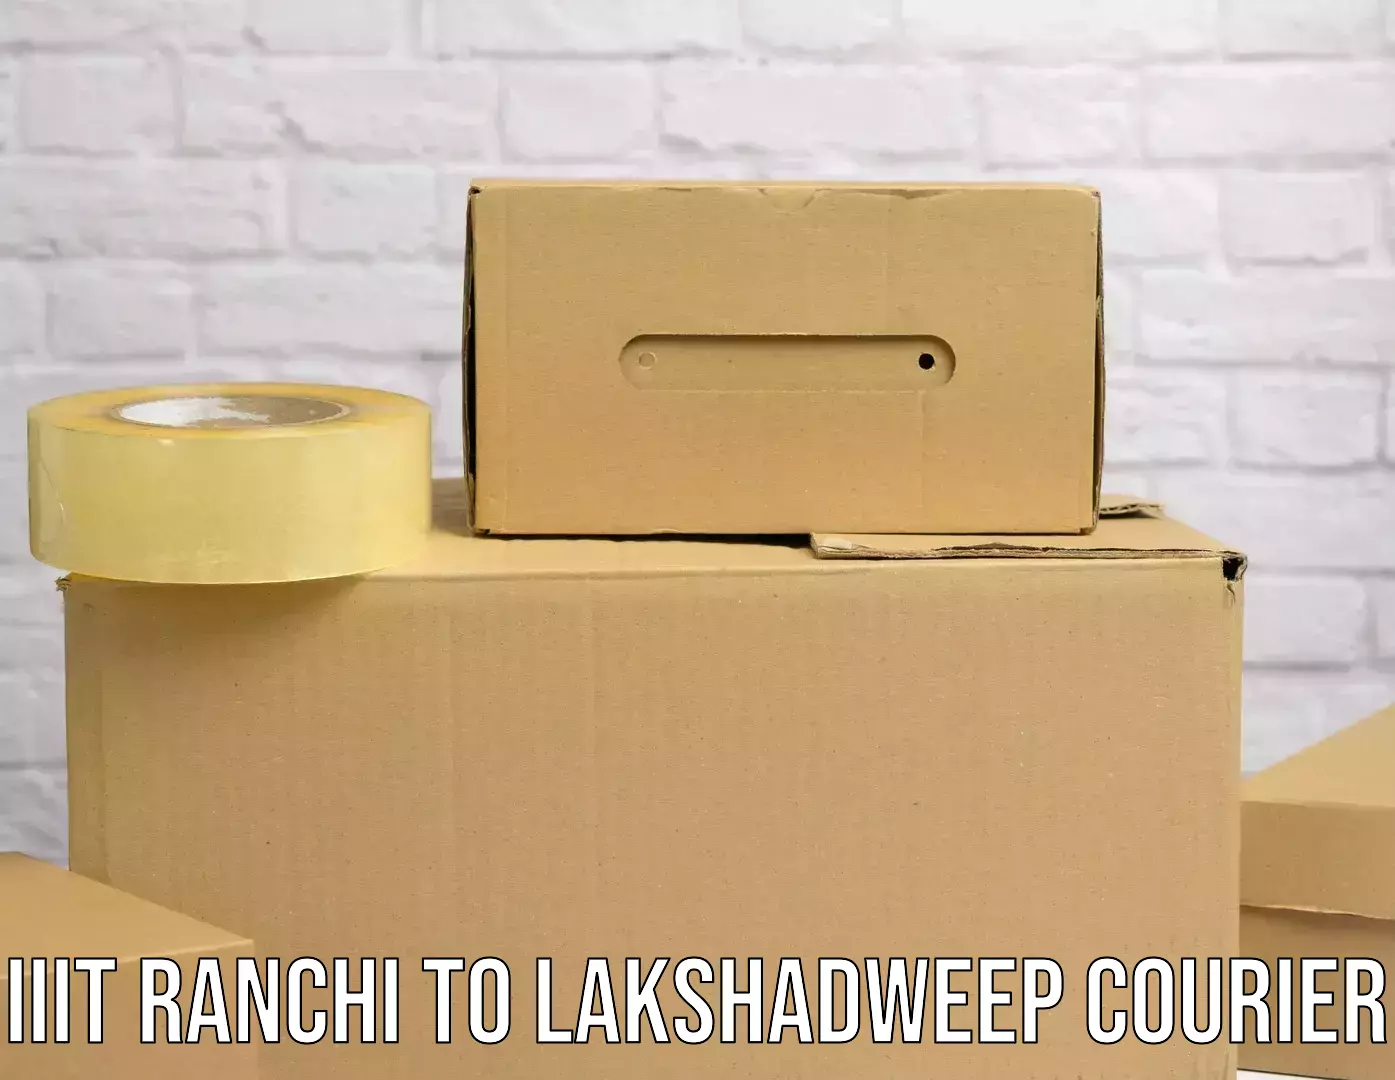 End-to-end delivery IIIT Ranchi to Lakshadweep